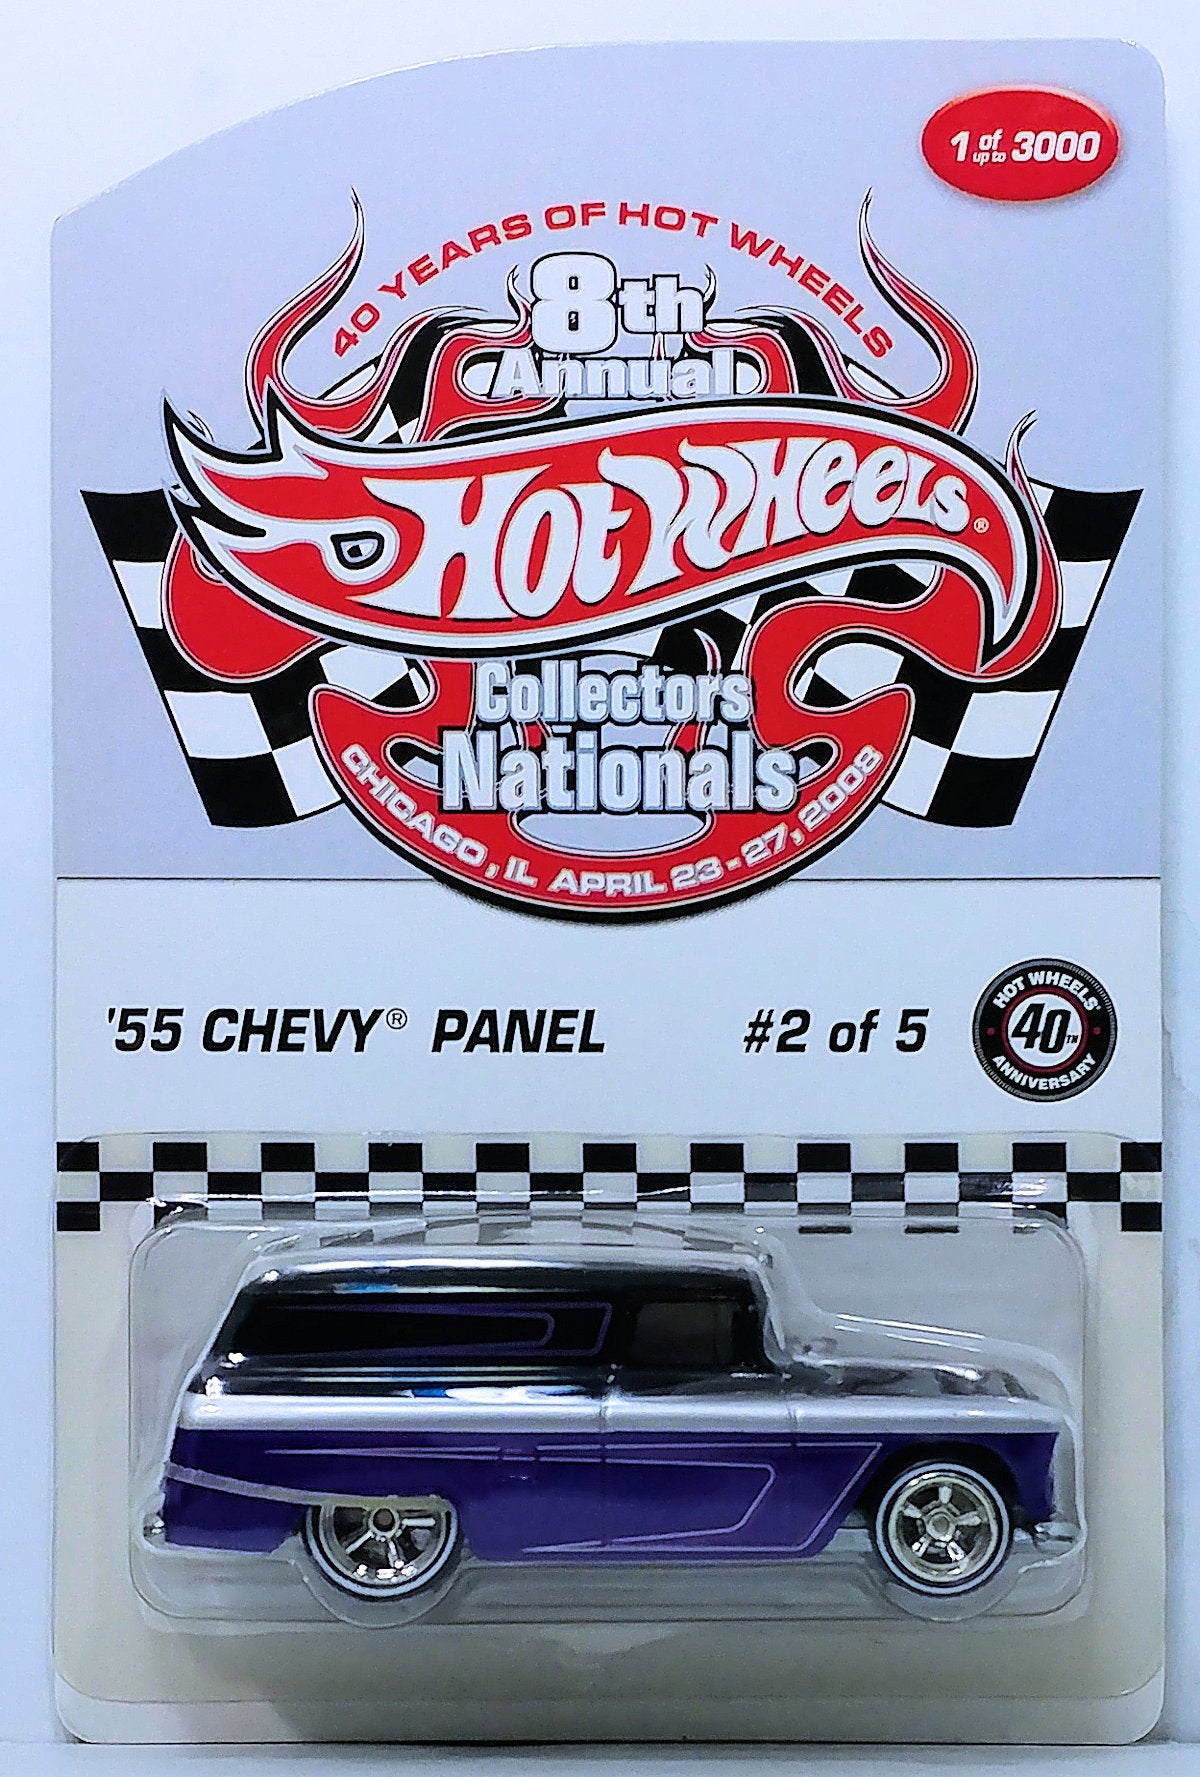 Hot Wheels 2008 - 8th Annual Collectors Nationals 2/5 - '55 Chevy